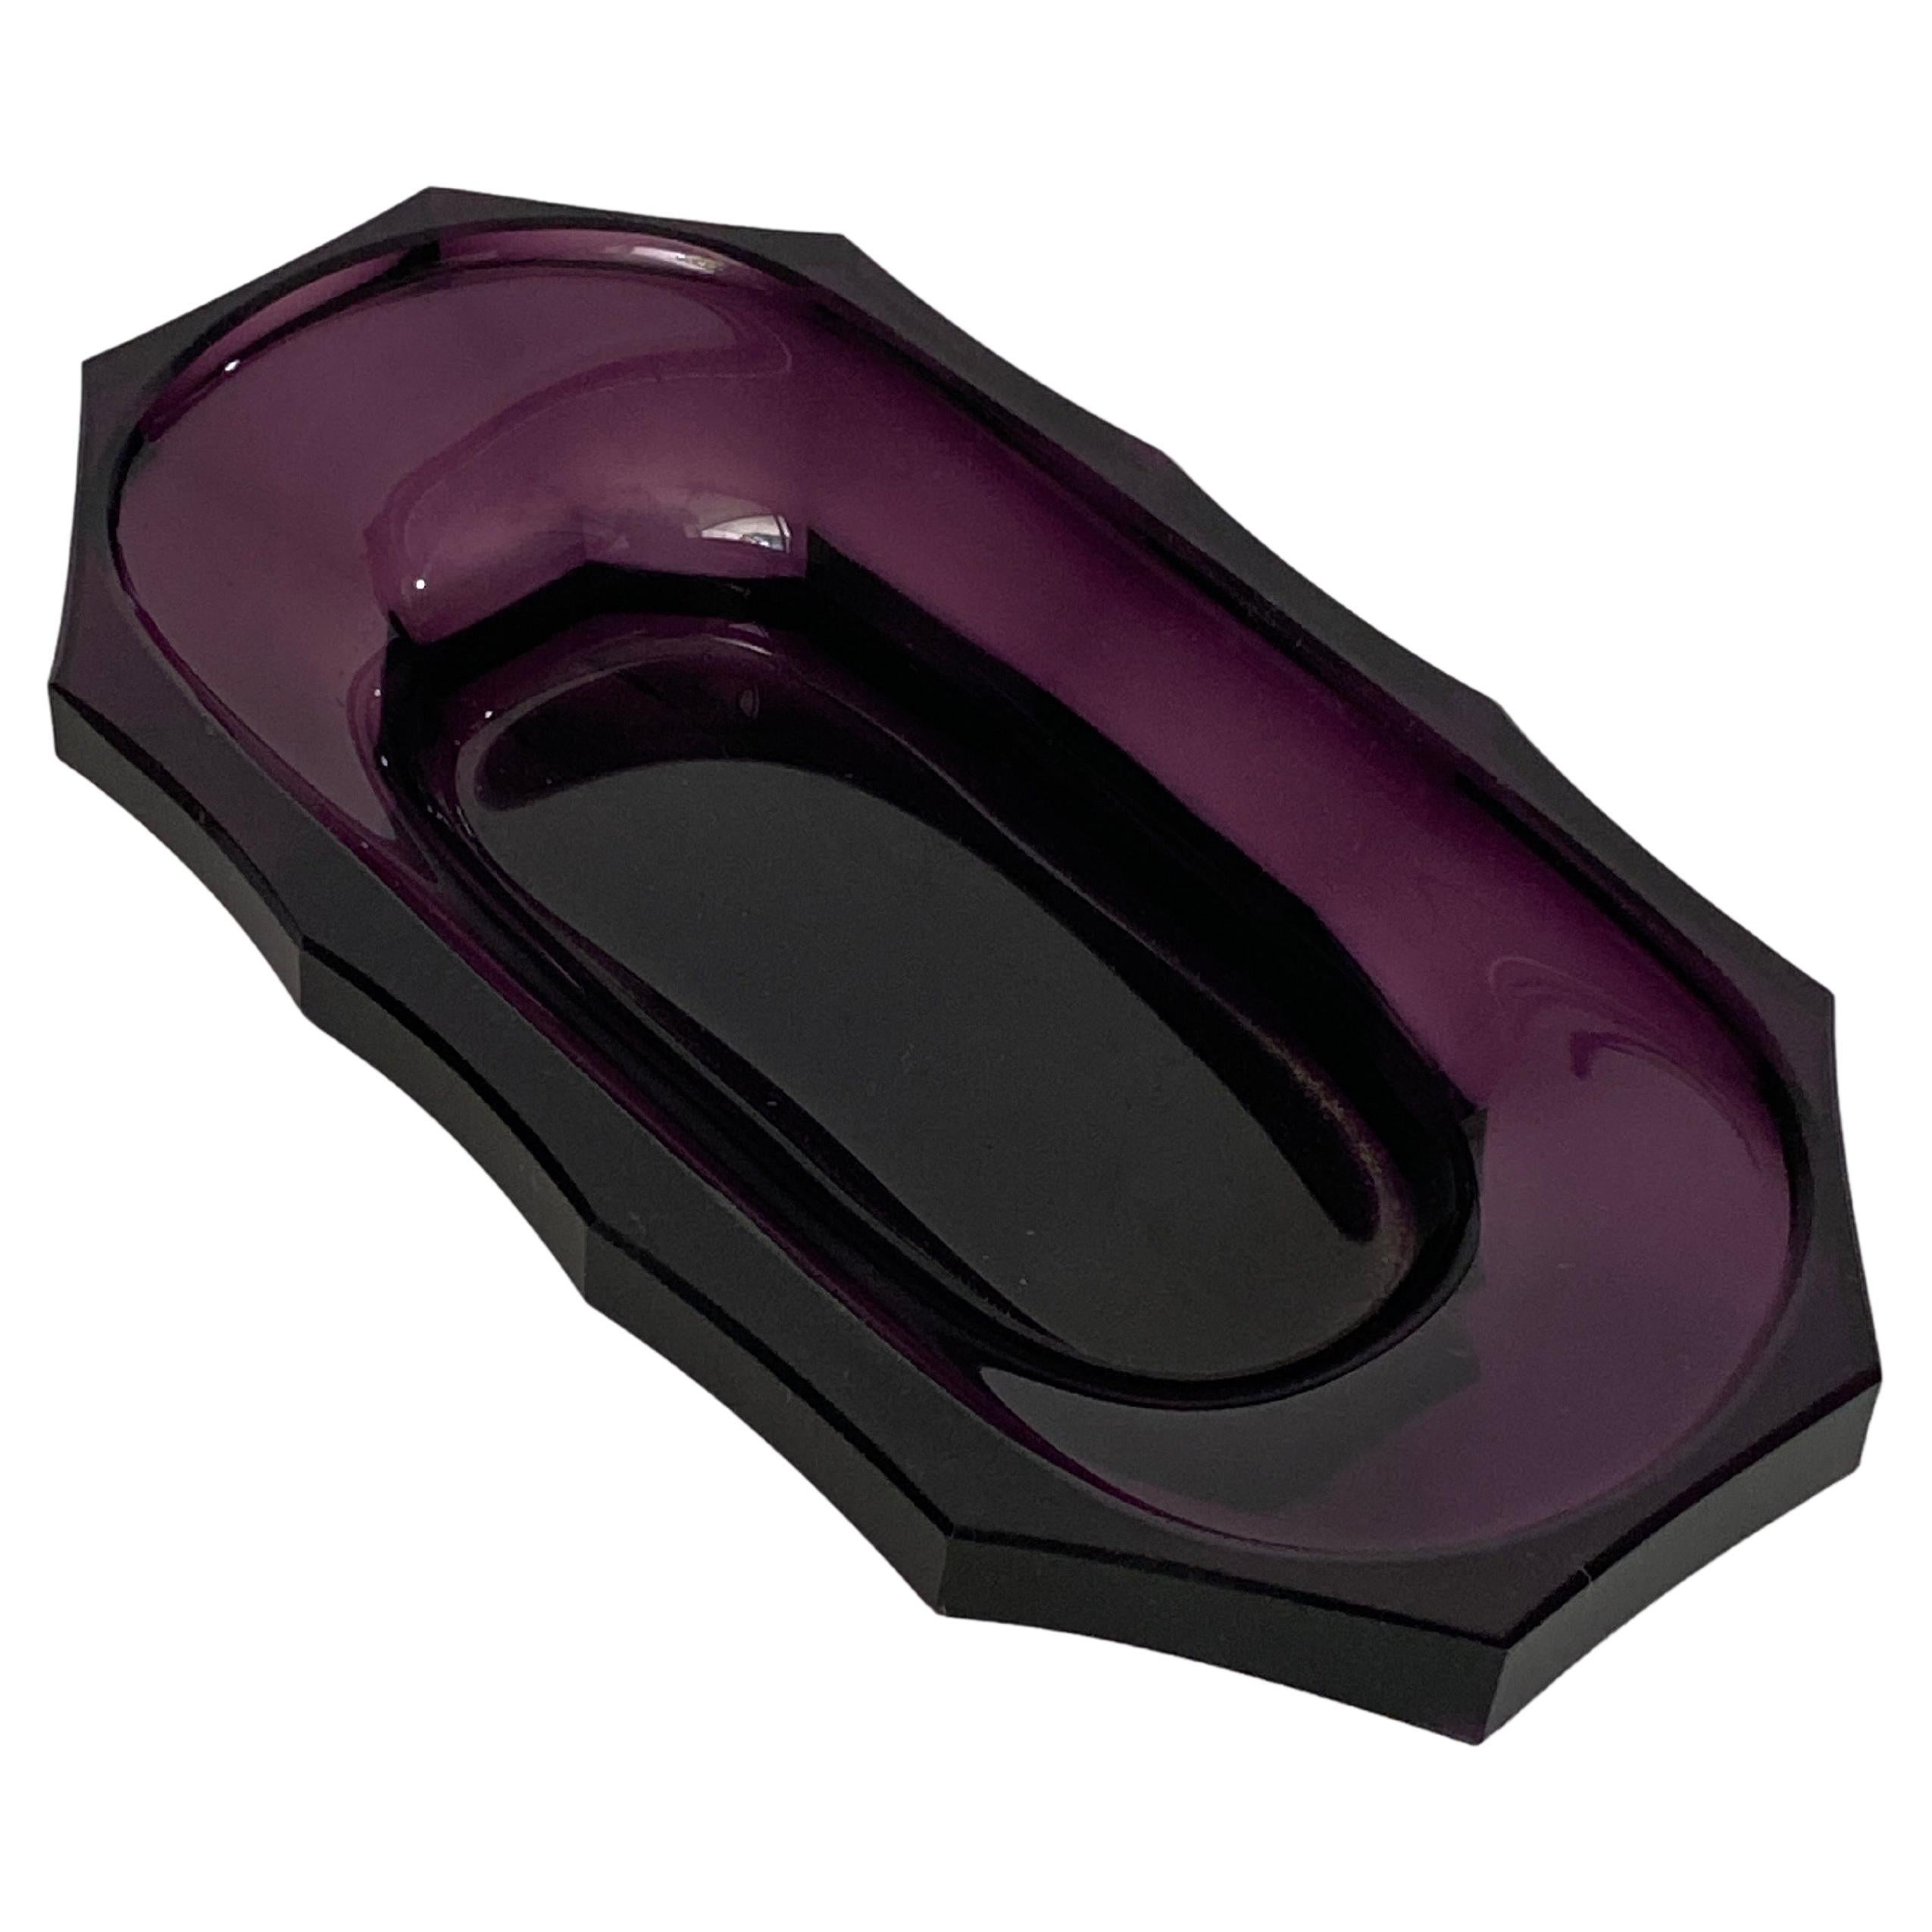 It is an Art Deco ashtray, in glass, with purple color transparencies. It was made in Art glassworks, in France in the 1940s. It is a decorative Vide poche.